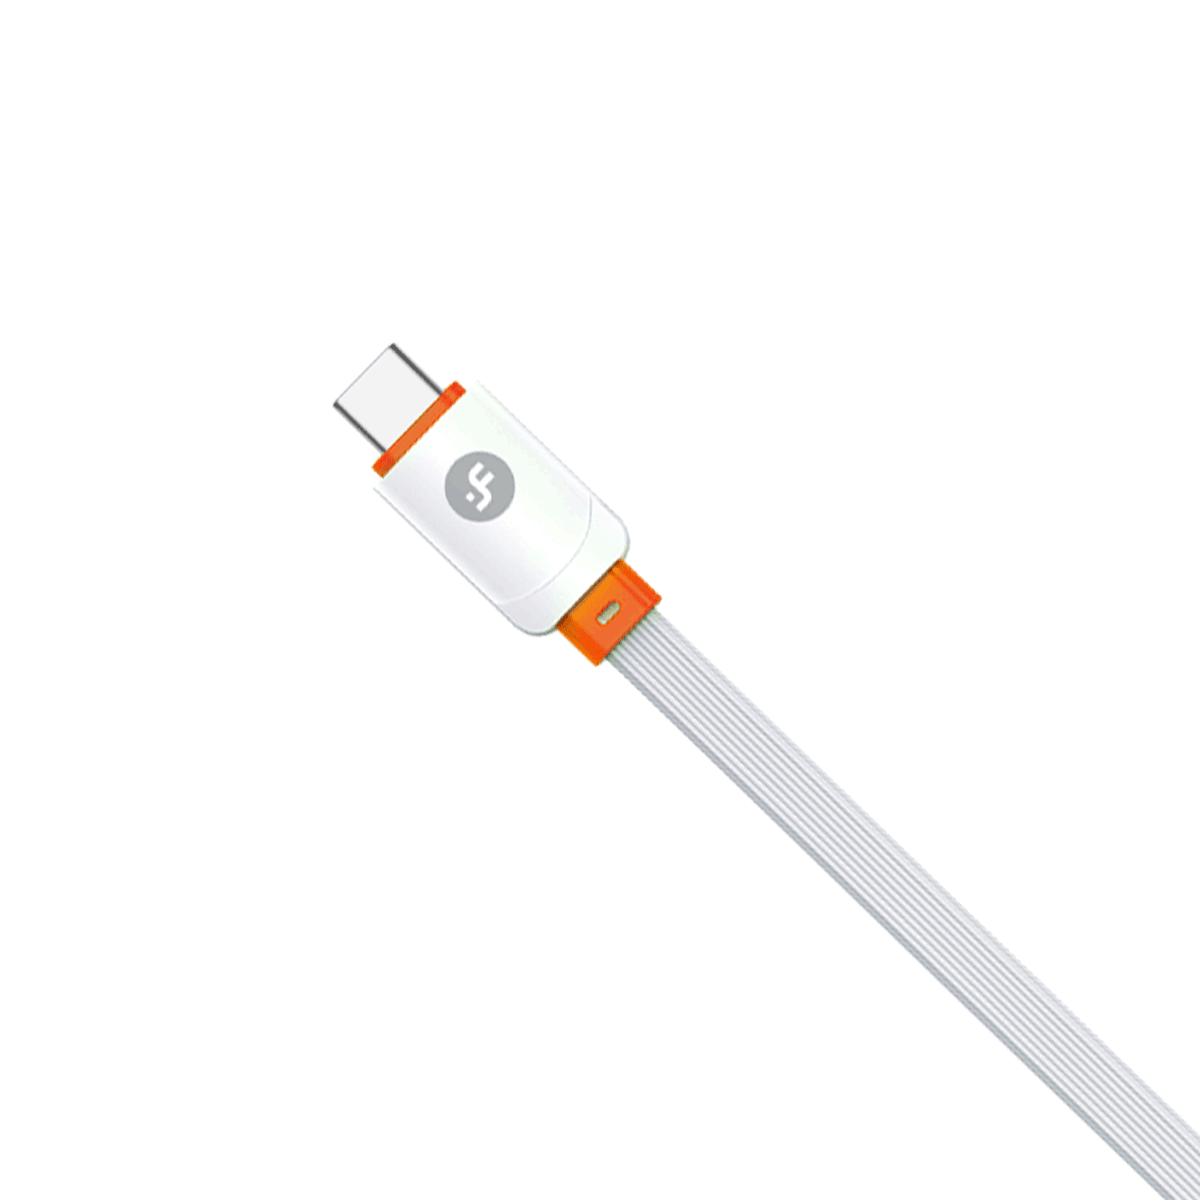 IF-02 Type-C 3.4A Fast Charging USB Data Cable( White & Red)